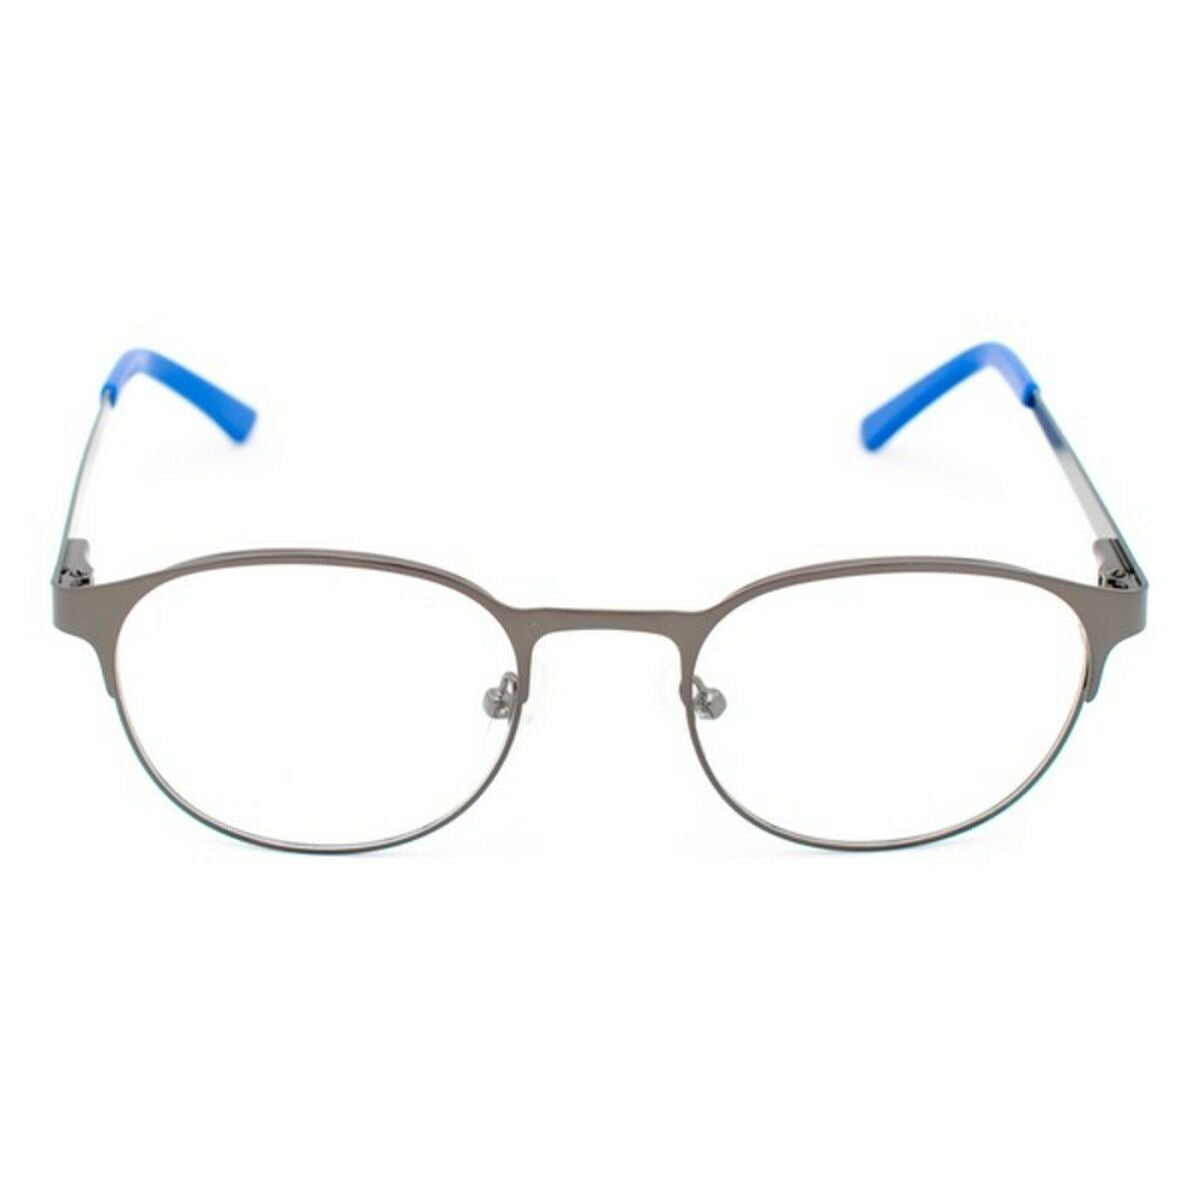 Unisex'Spectacle frame My Glasses And Me 41441-C1 (Ø 48 mm)